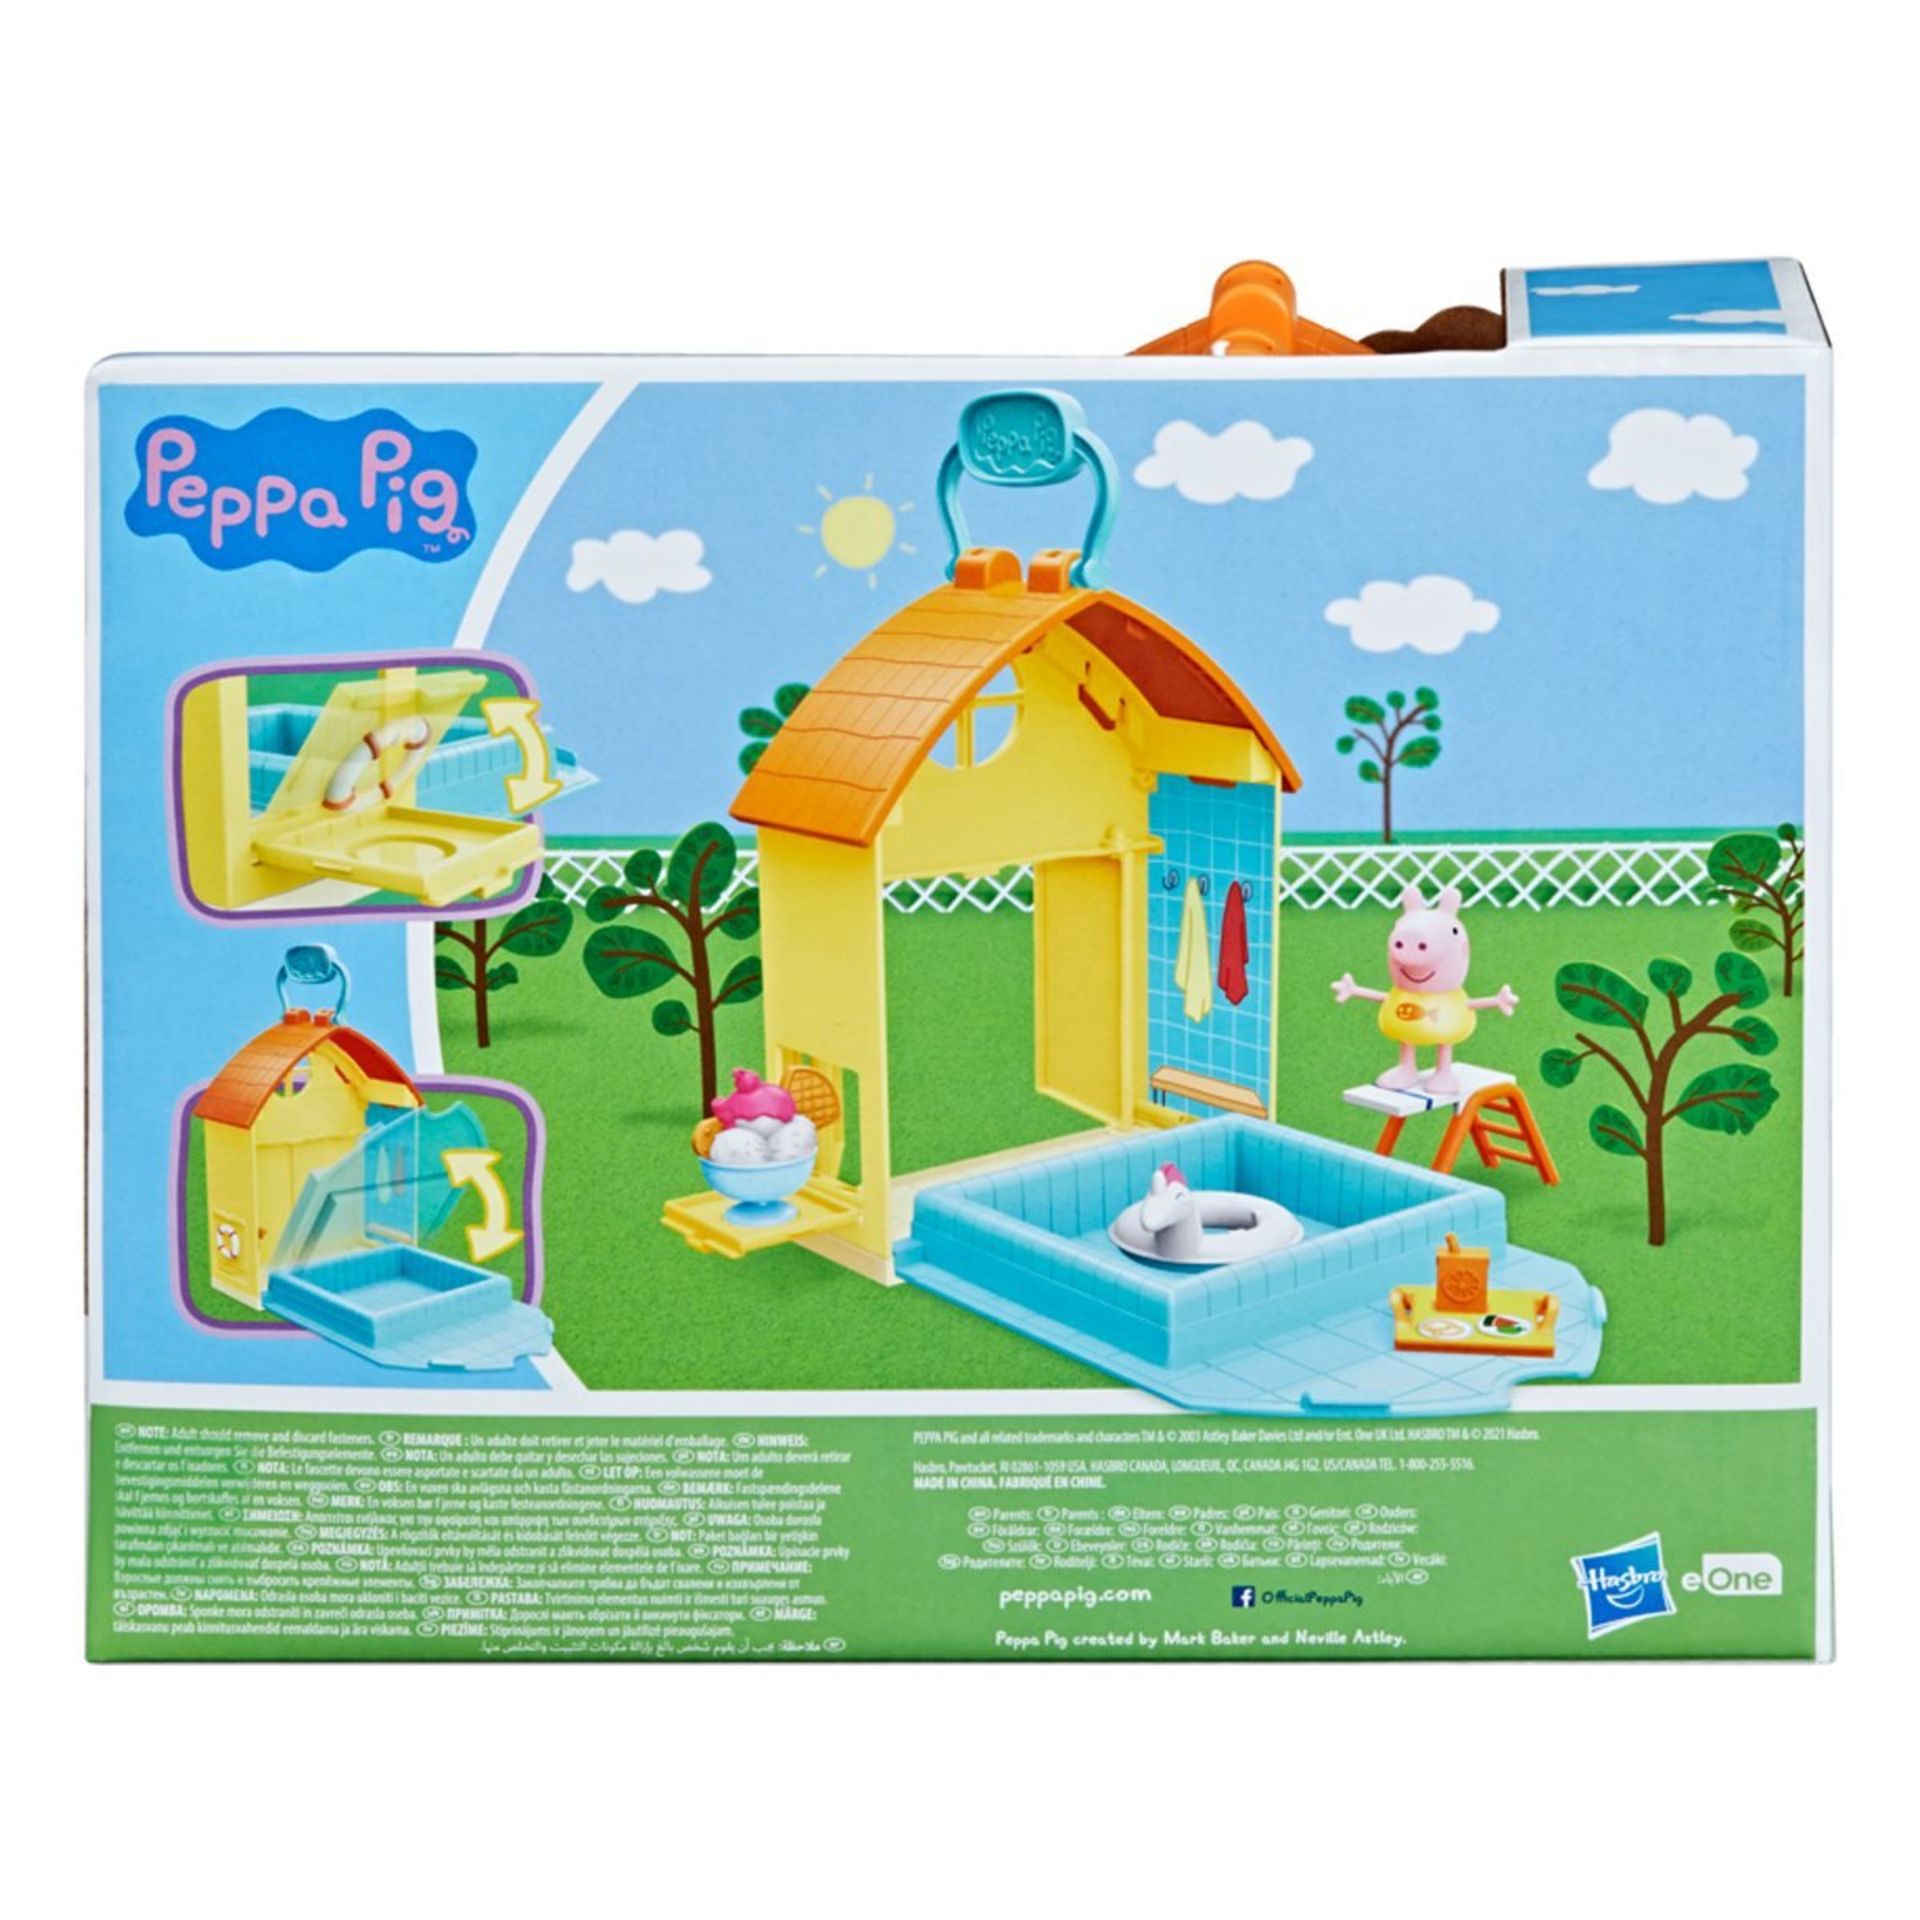 100 X NEW PEPPAS SWIMMING POOL FUN - MAIL ORDER PACKAGING - Image 11 of 11